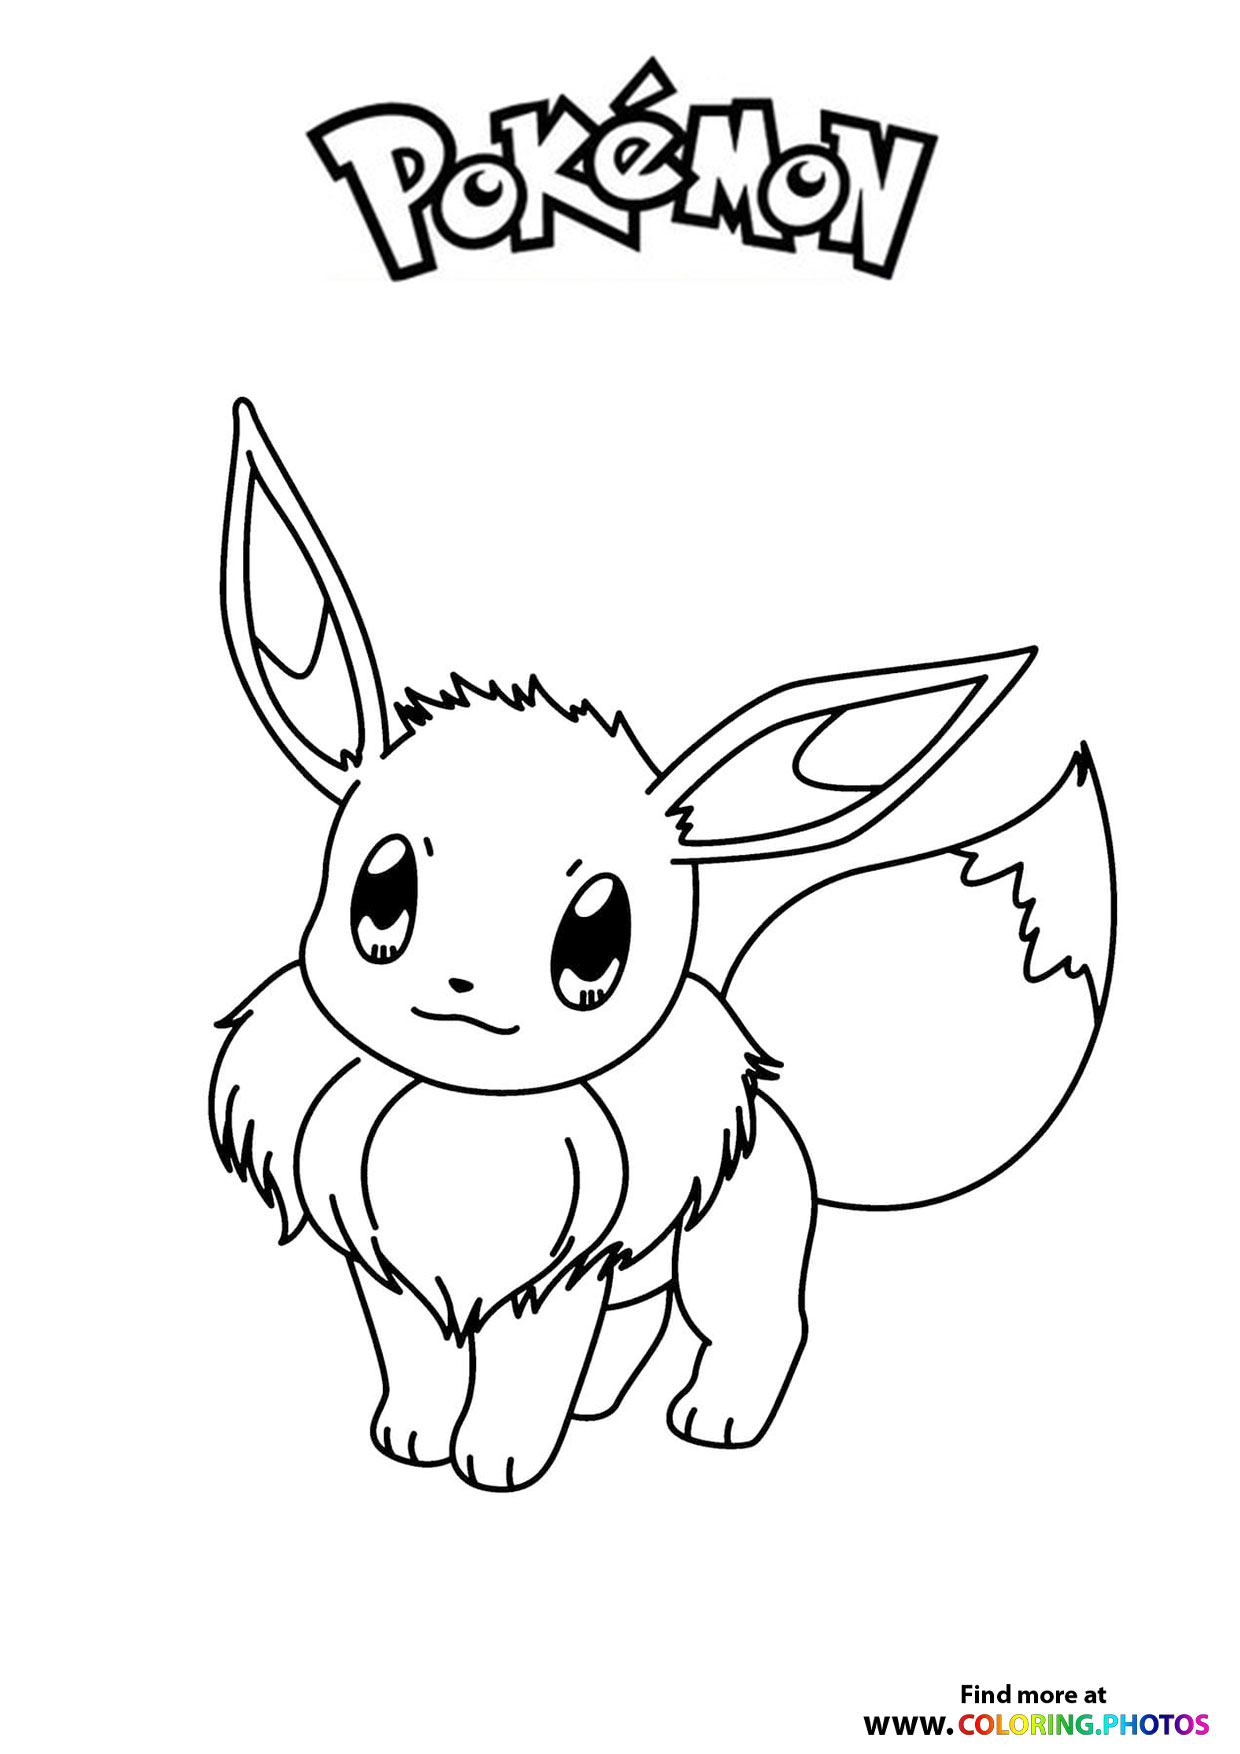 Cute Eevee Pokemon Coloring Pages for kids